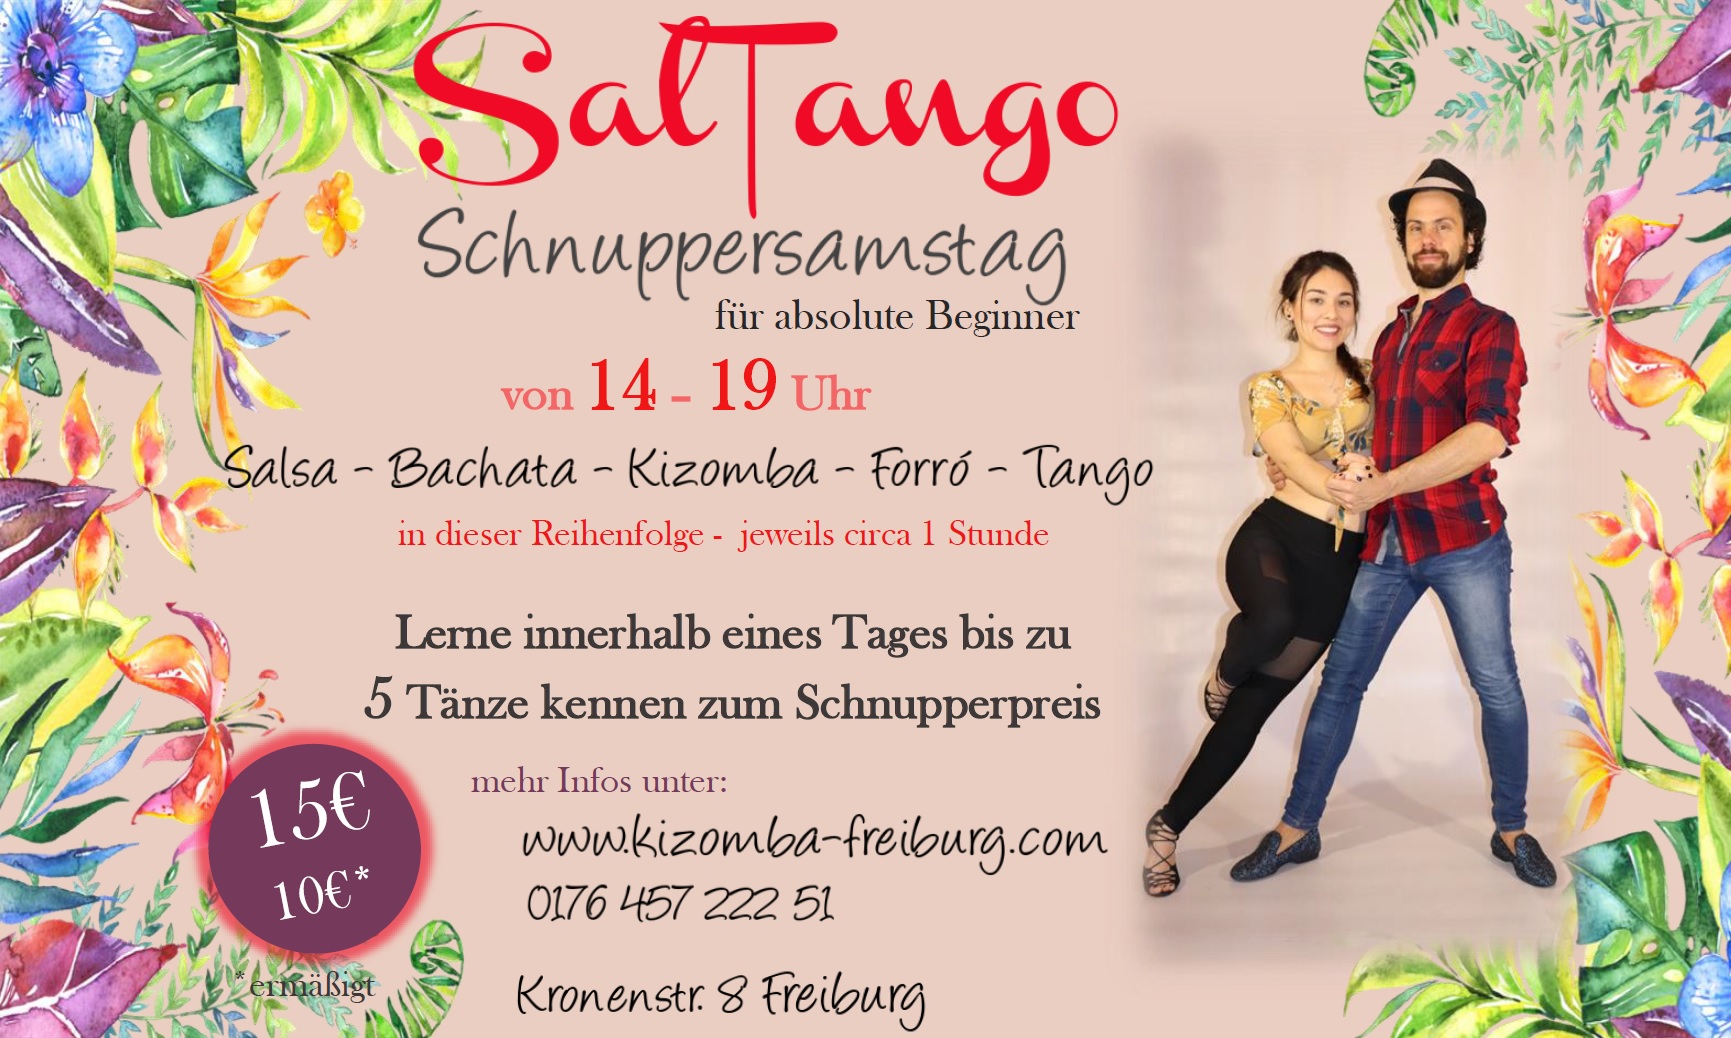 You are currently viewing Schnuppersamstag bei Saltango